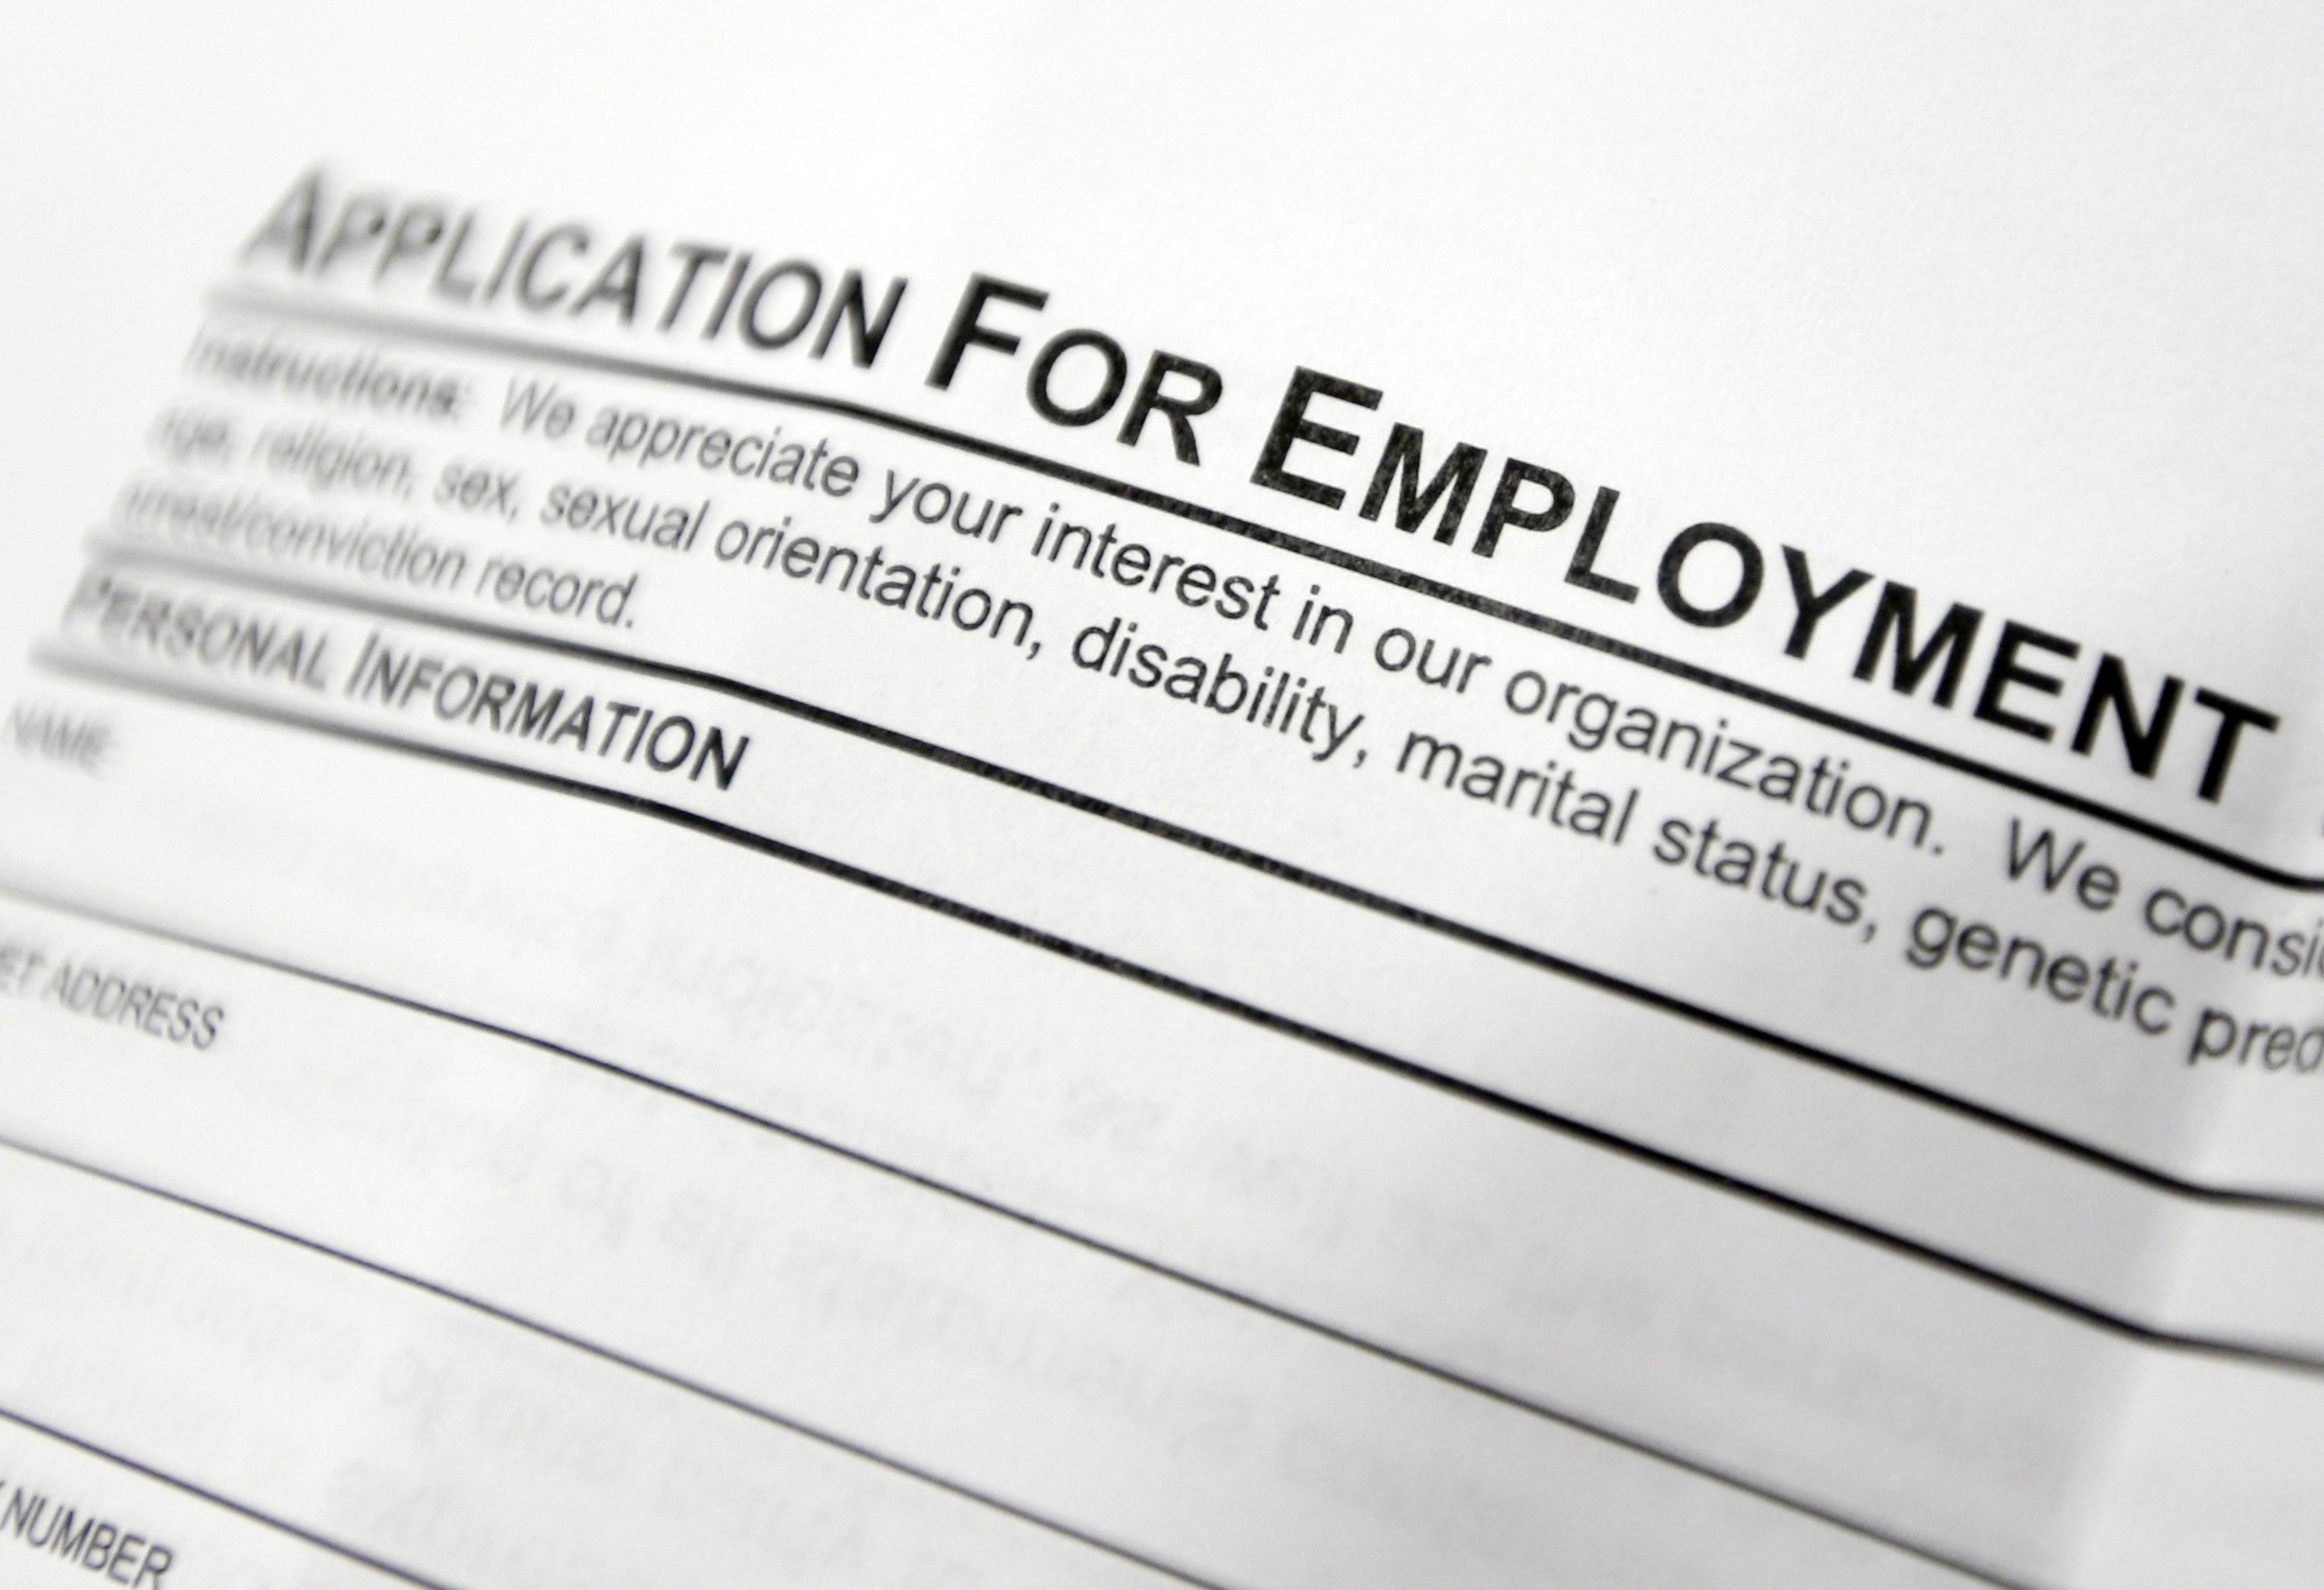 PHOTO: An employment application form on a table during a job fair at Columbia-Greene Community College in Hudson, New York is pictured in this April 22, 2014 file photo.